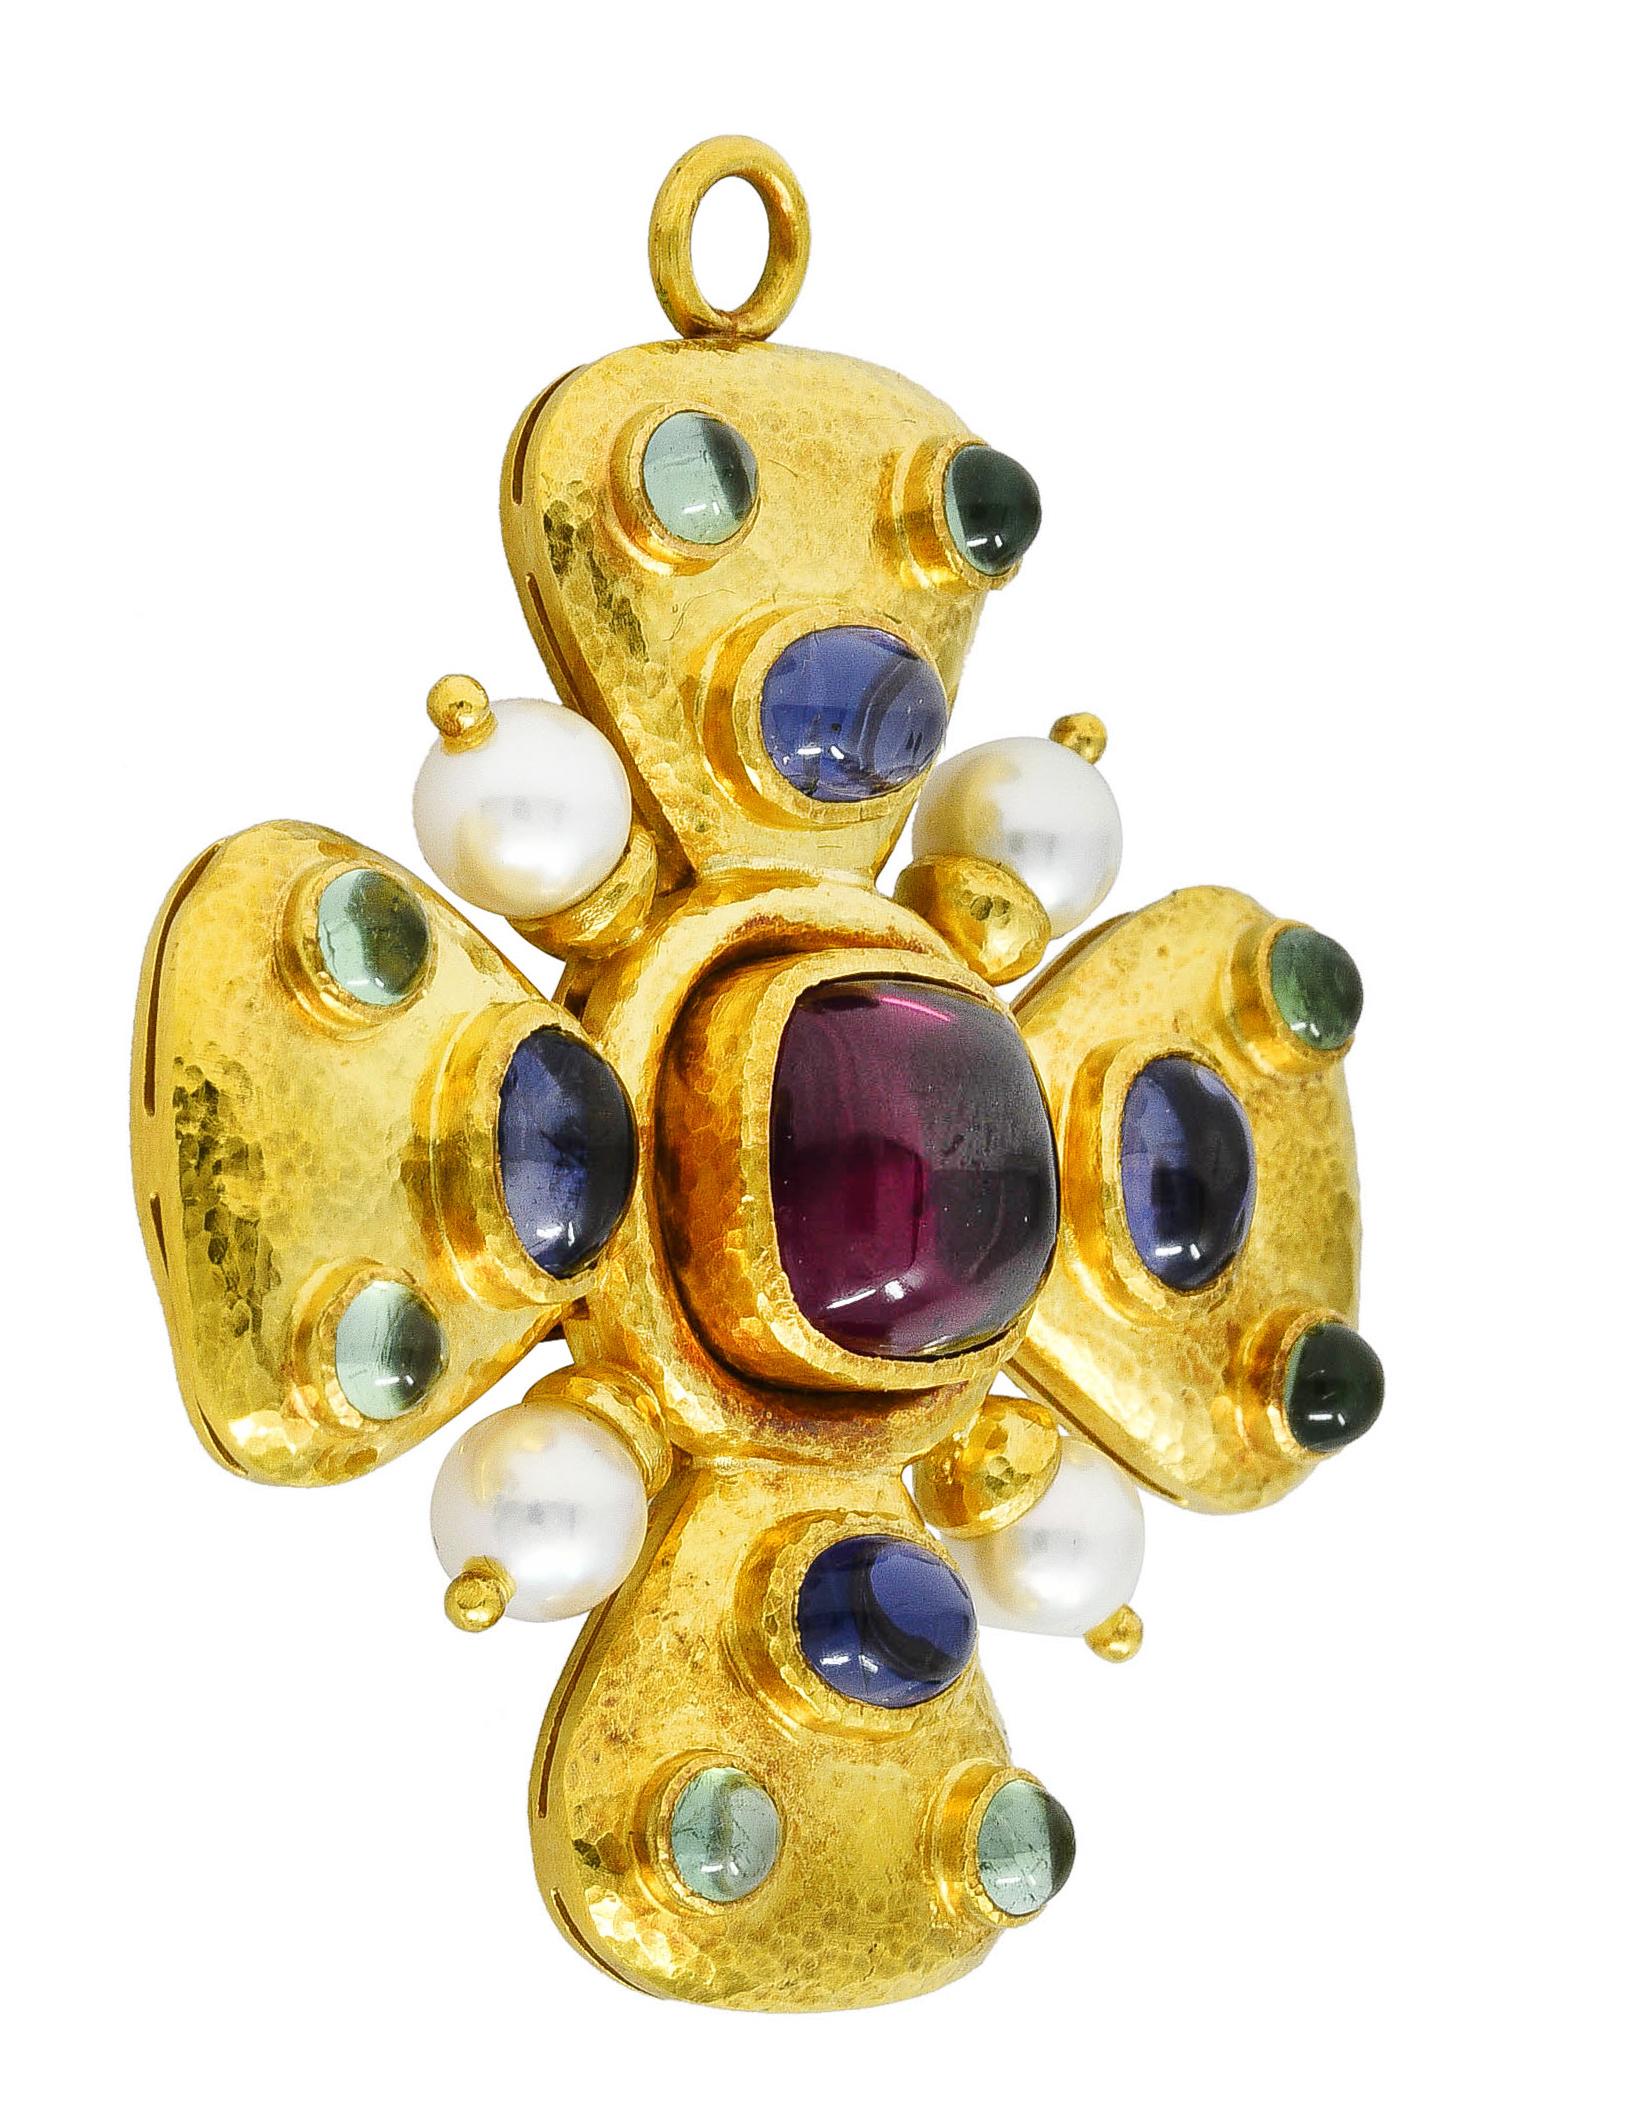 Pendant brooch is designed as a puffed form maltese cross with a strongly hammered finish. Centering a sugarloaf cabochon rhodolite garnet measuring approximately 10.5 x 10.5 mm - eye clean and purplish red in color. With oval iolite cabochons